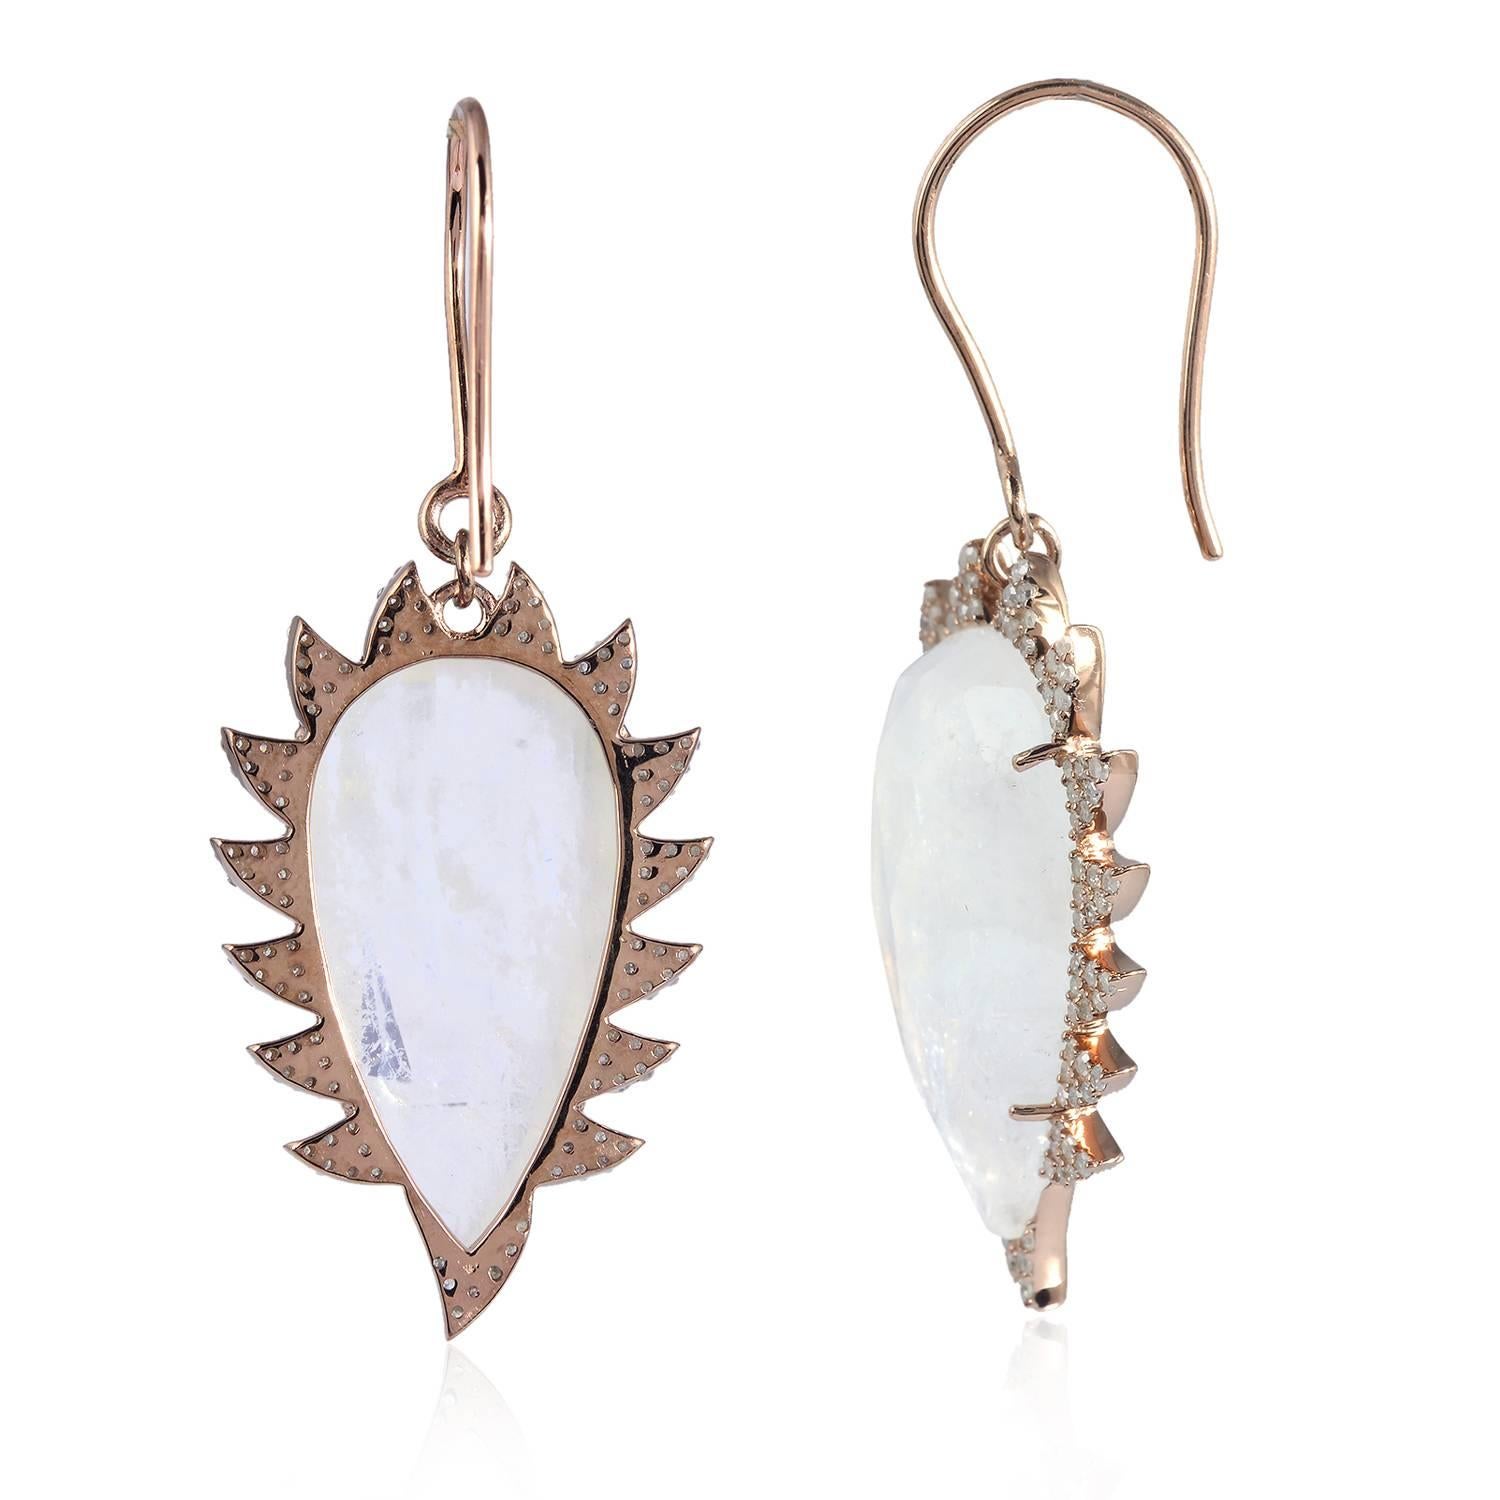 These modern and fiercely gorgeous rose cut rainbow moonstone drop earrings are framed in sparkling signature 